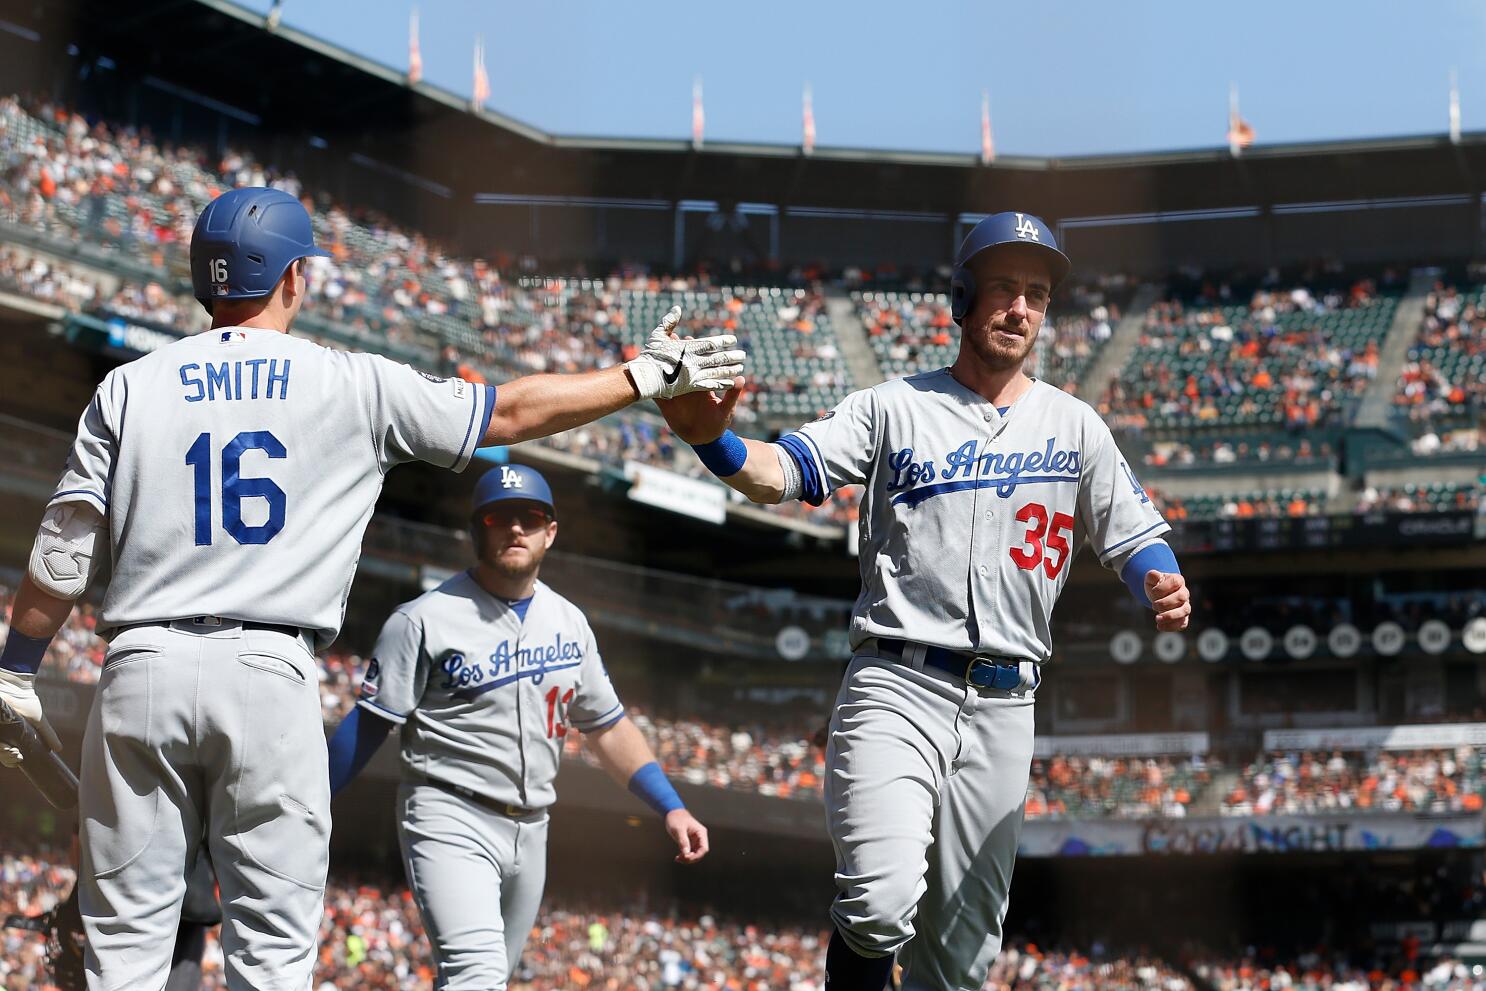 Dodgers Rumors: Joc Pederson, Corey Seager Renew Contracts For